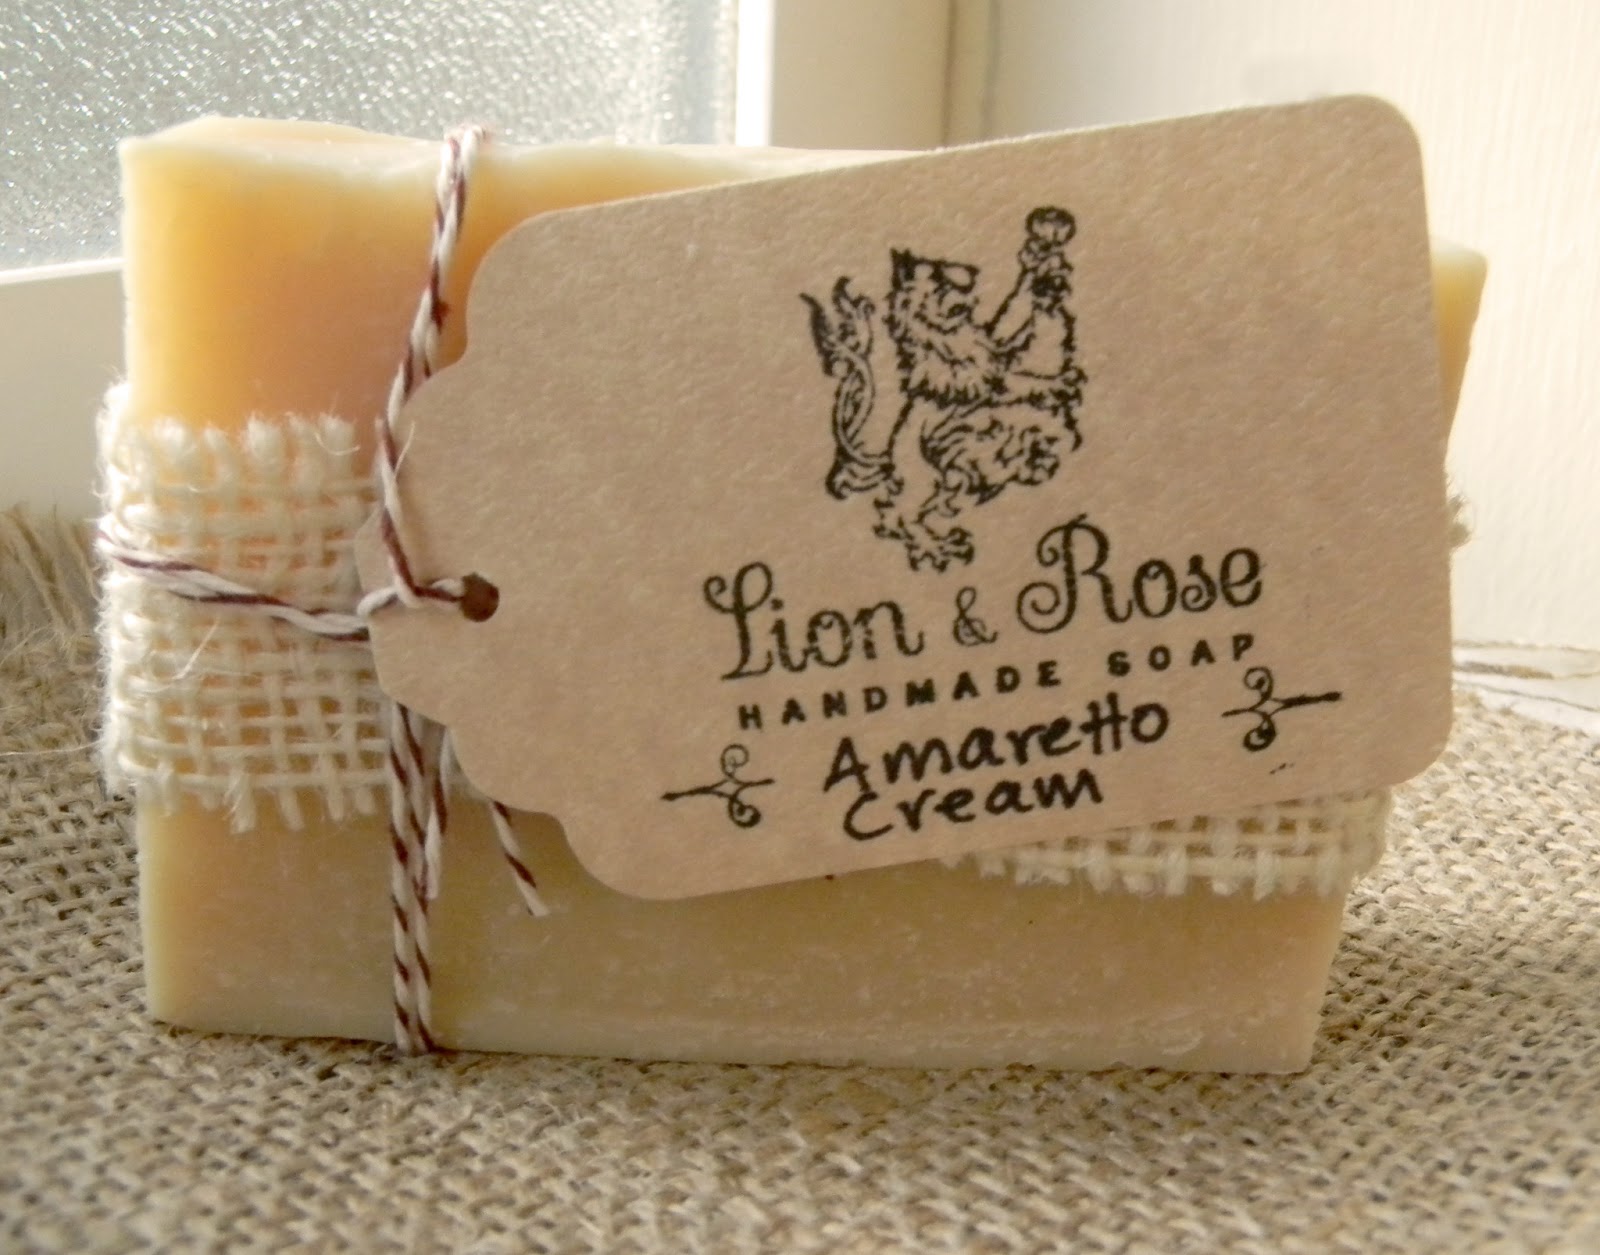 Lion & Rose Handmade Soap Blog: New Packaging and Big News!